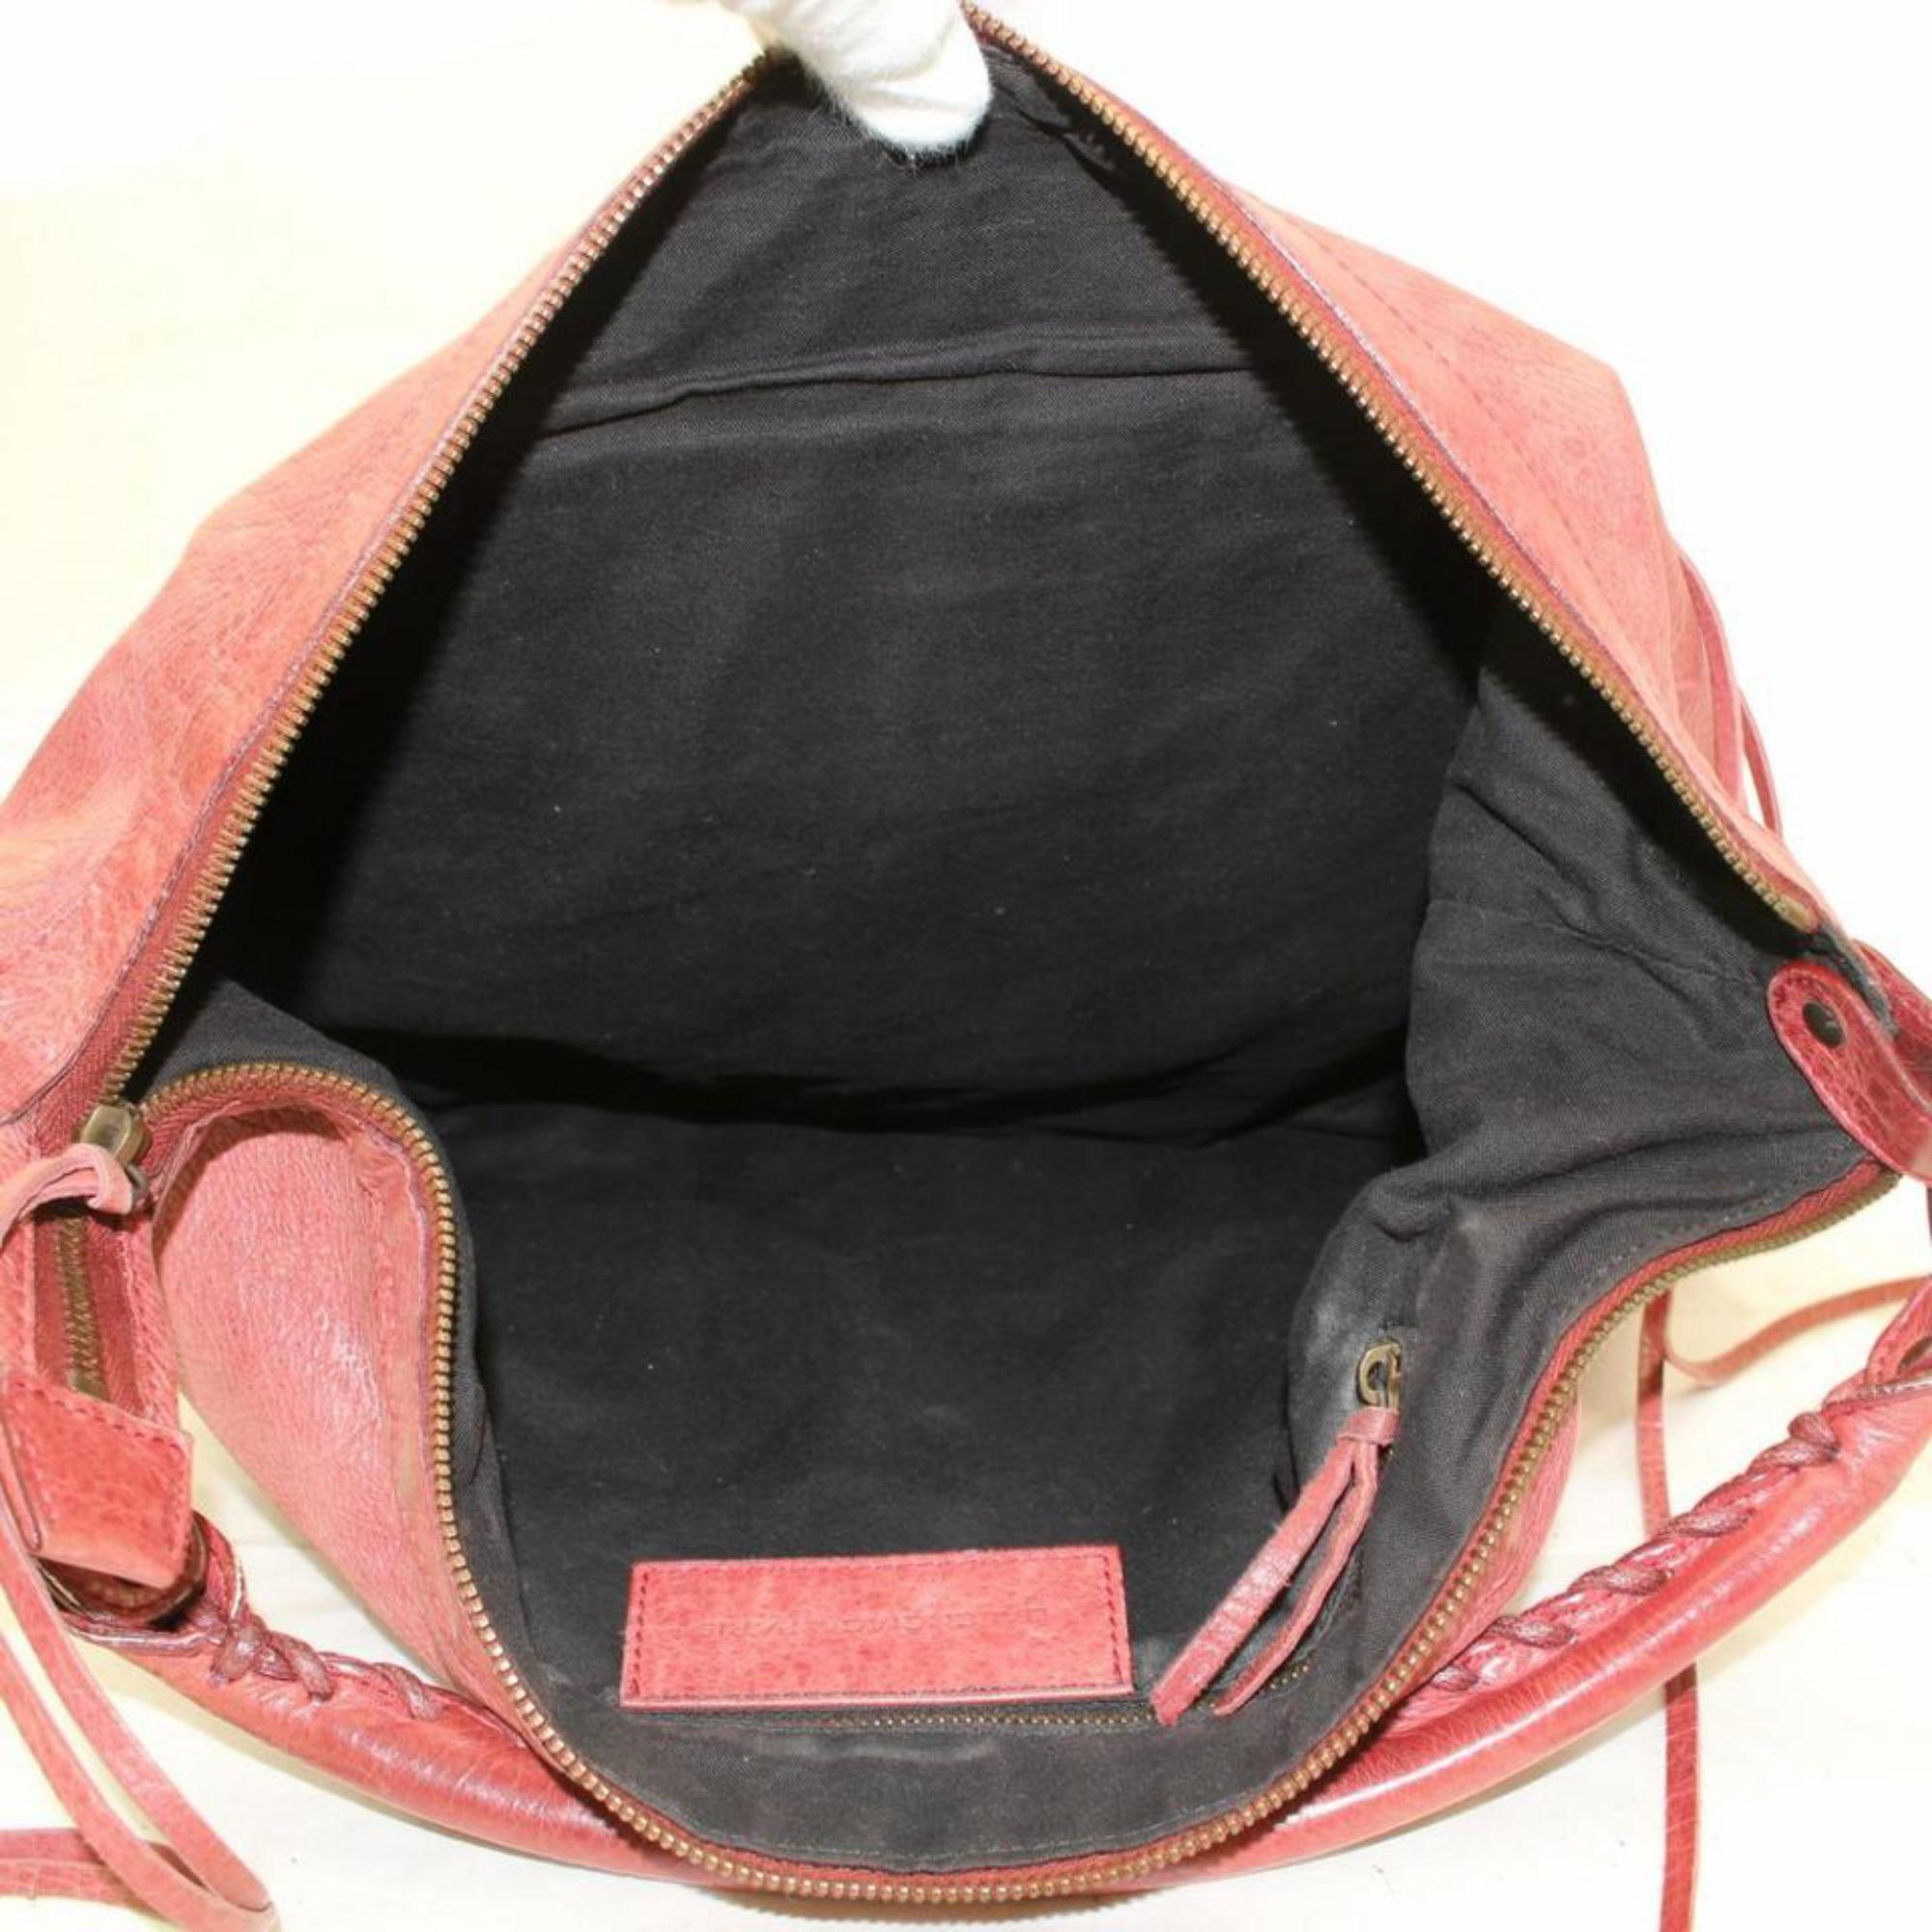 Balenciaga The Day Hobo 865766 Light Red Leather Shoulder Bag In Good Condition For Sale In Forest Hills, NY